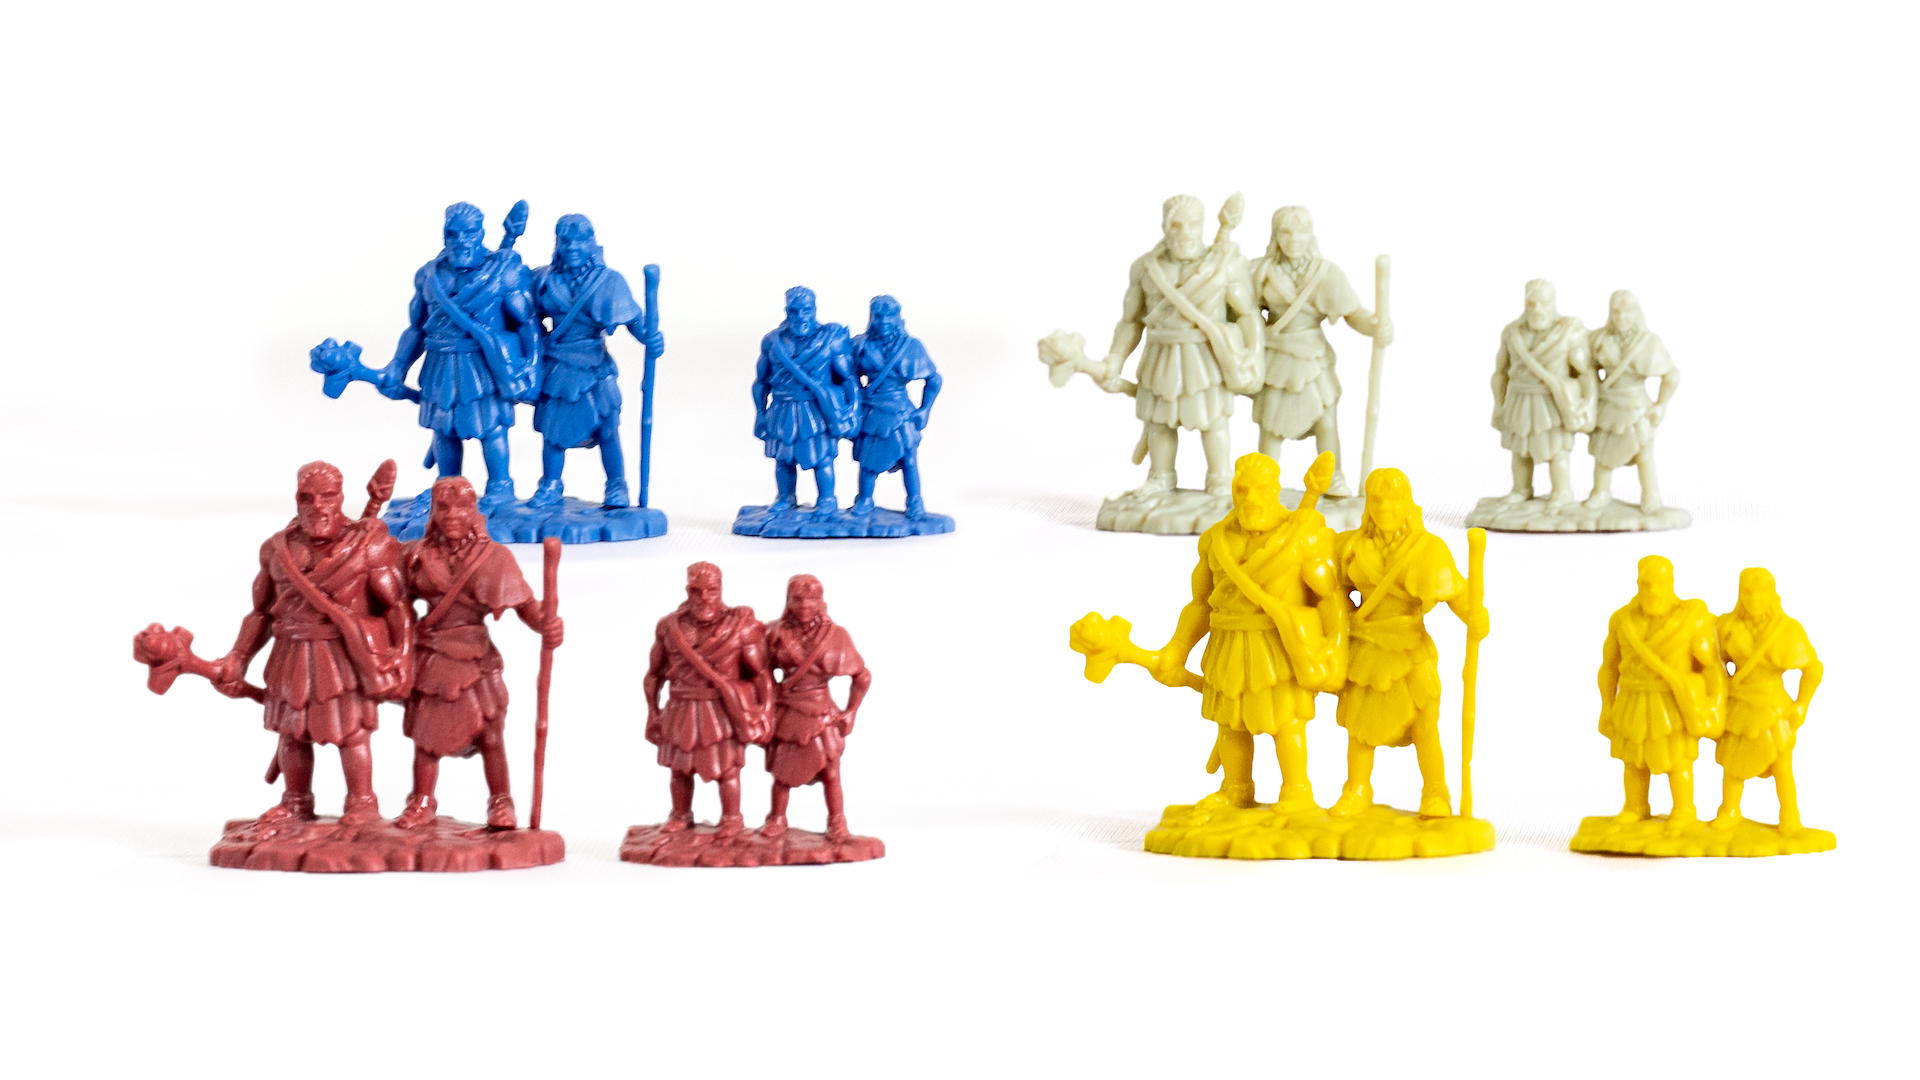 A product shot of Catan - Dawn of Humankind, which is a reboot of the 2002 board game Settlers of the Stone Age.